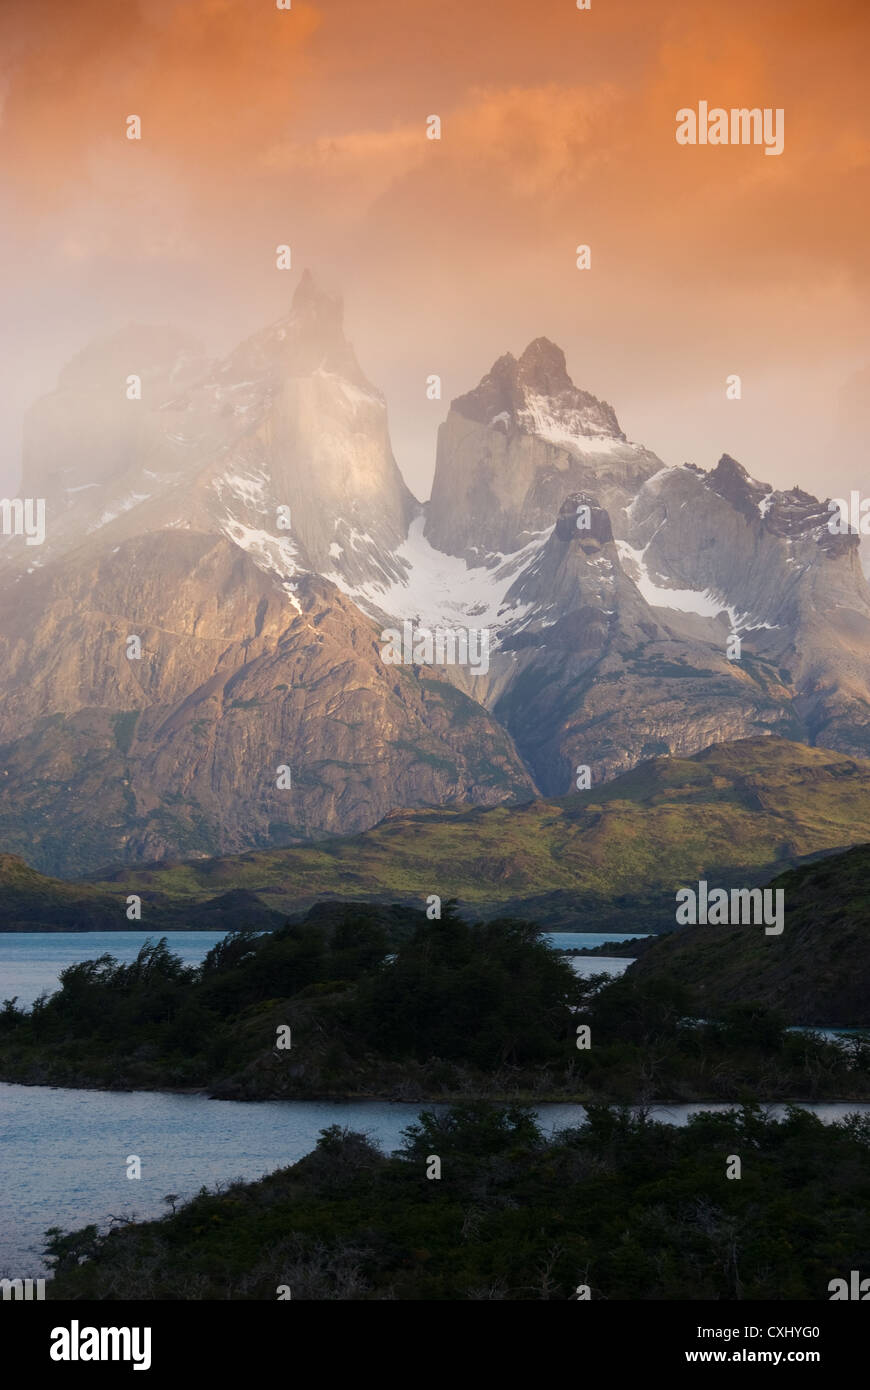 Elk198-4412v Chile, Patagonia, Torres del Paine NP, Cuernos massif with Lago Pehoe, sunrise on Andes Stock Photo